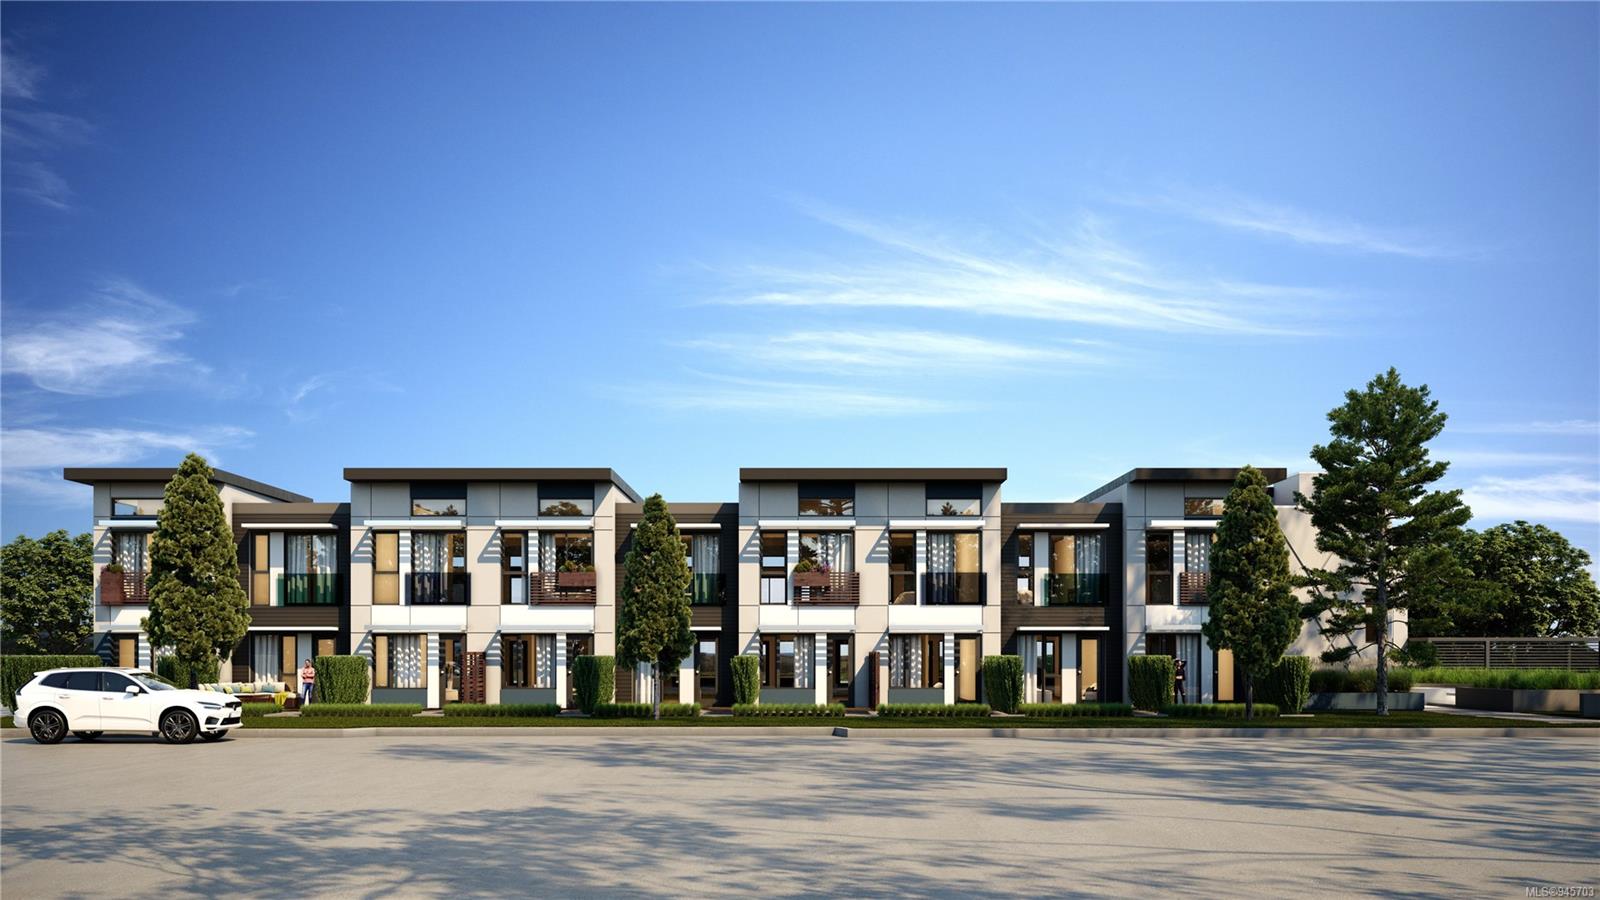 Rhythm Living by Cube Project Management is a new Sidney condo development.